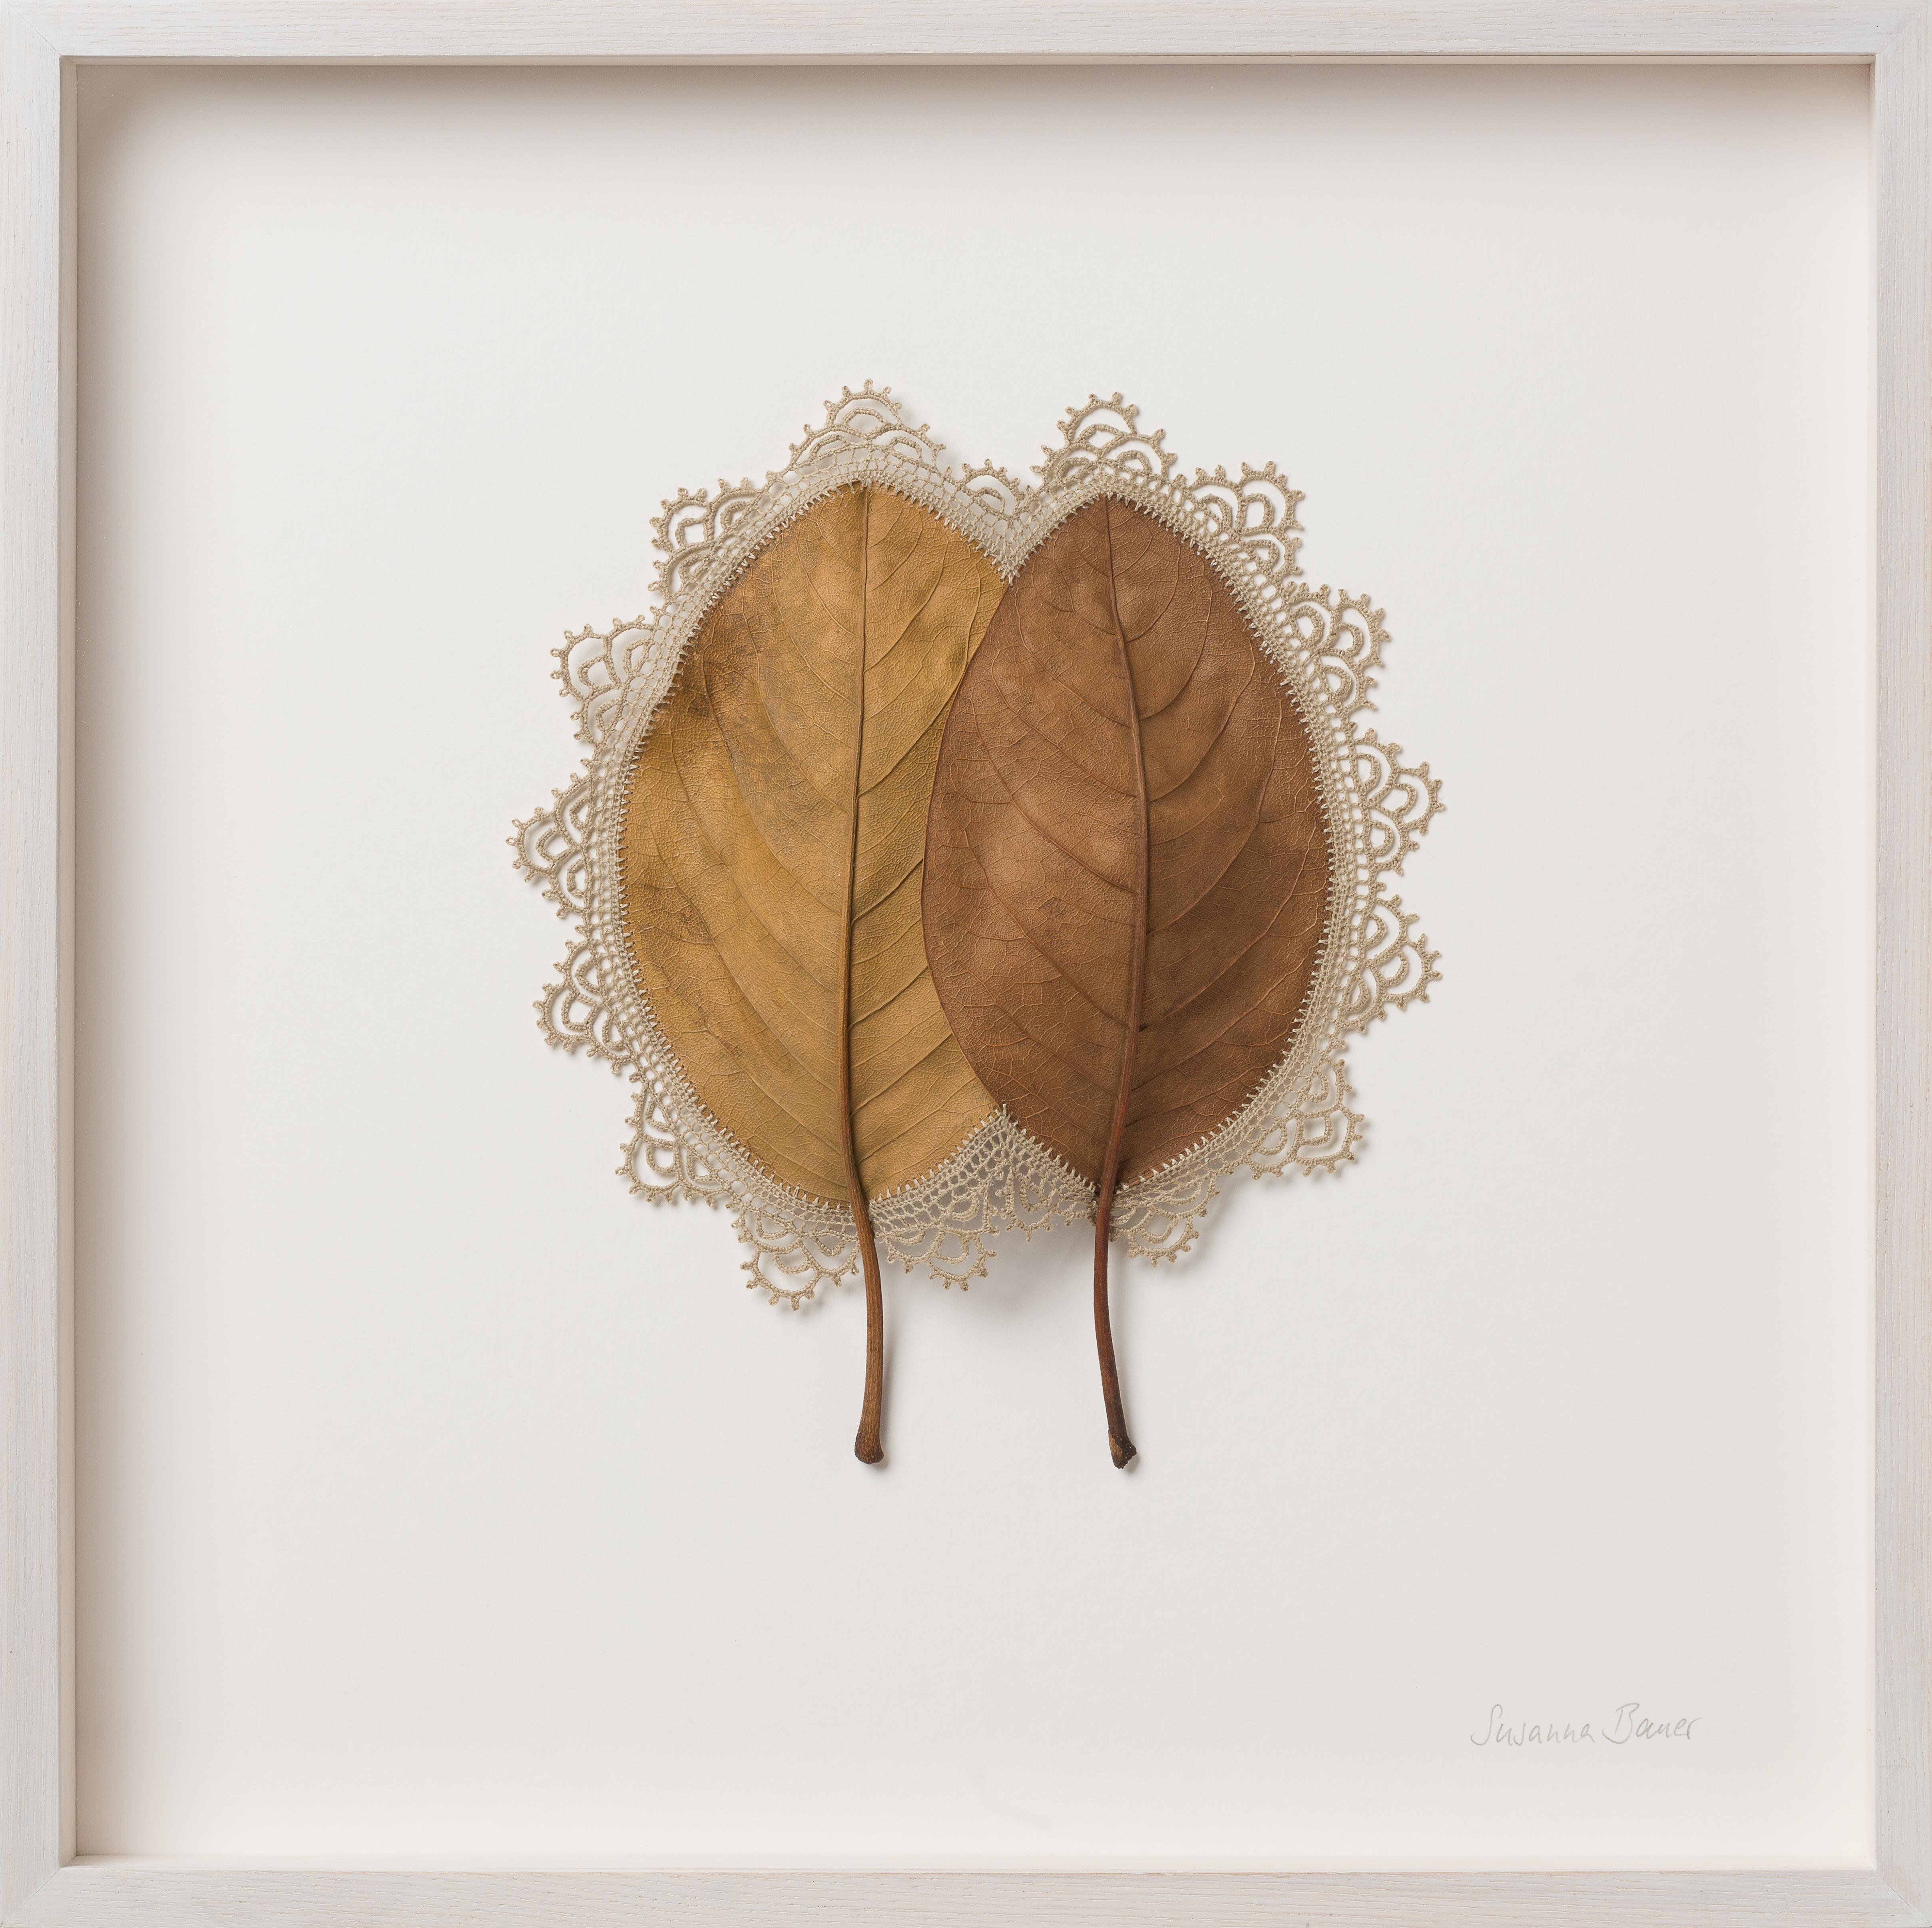 Everything That Surrounds Us II -Intricate contemporary crochet leaf nature art - Mixed Media Art by Susanna Bauer